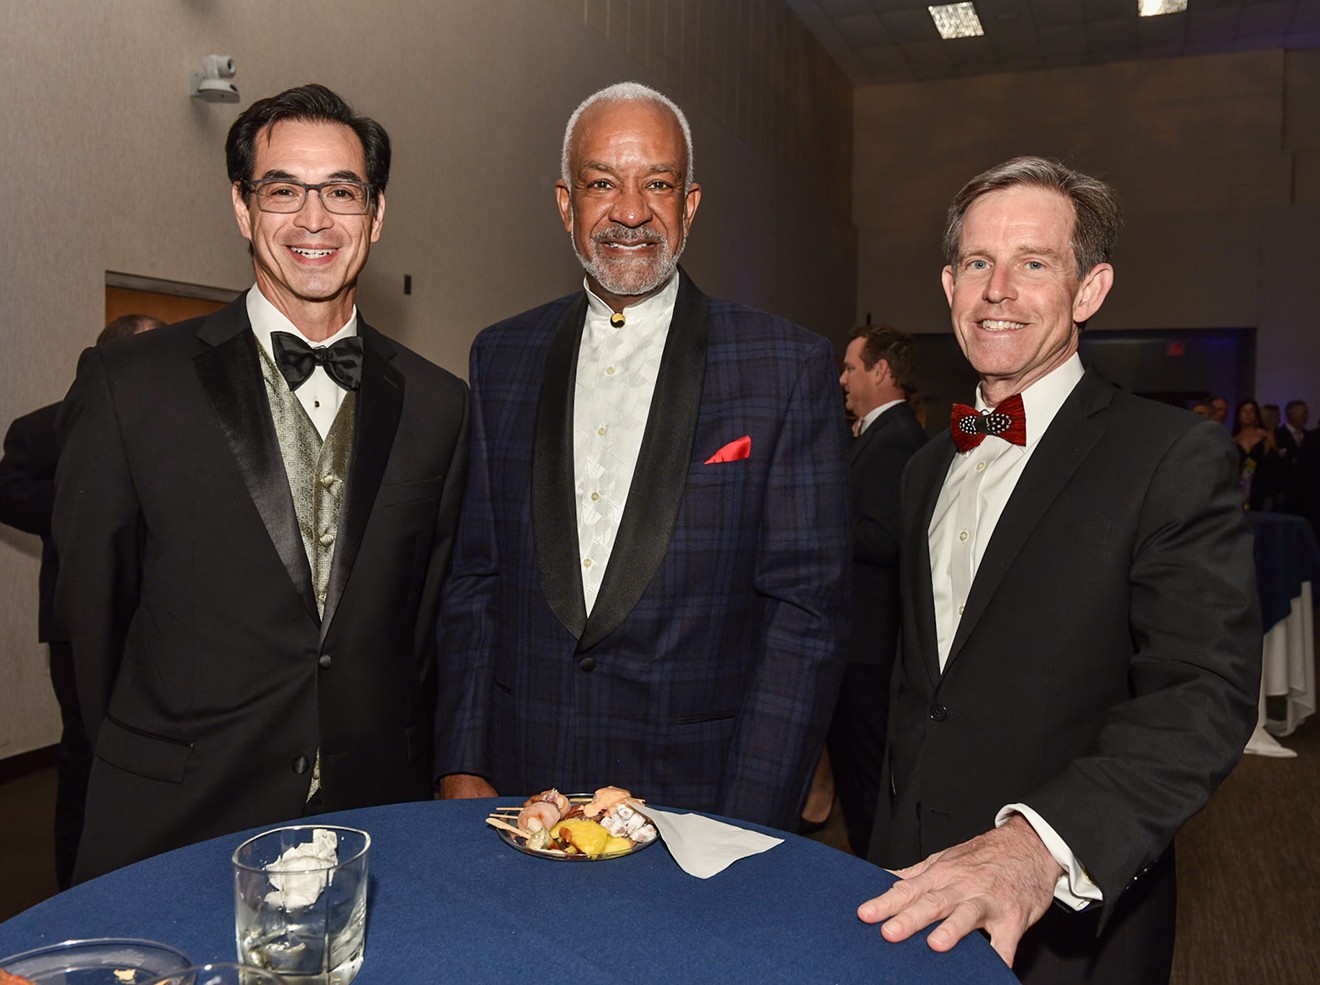 Savannah Technical College’s 19th Annual Opportunity Awards Gala